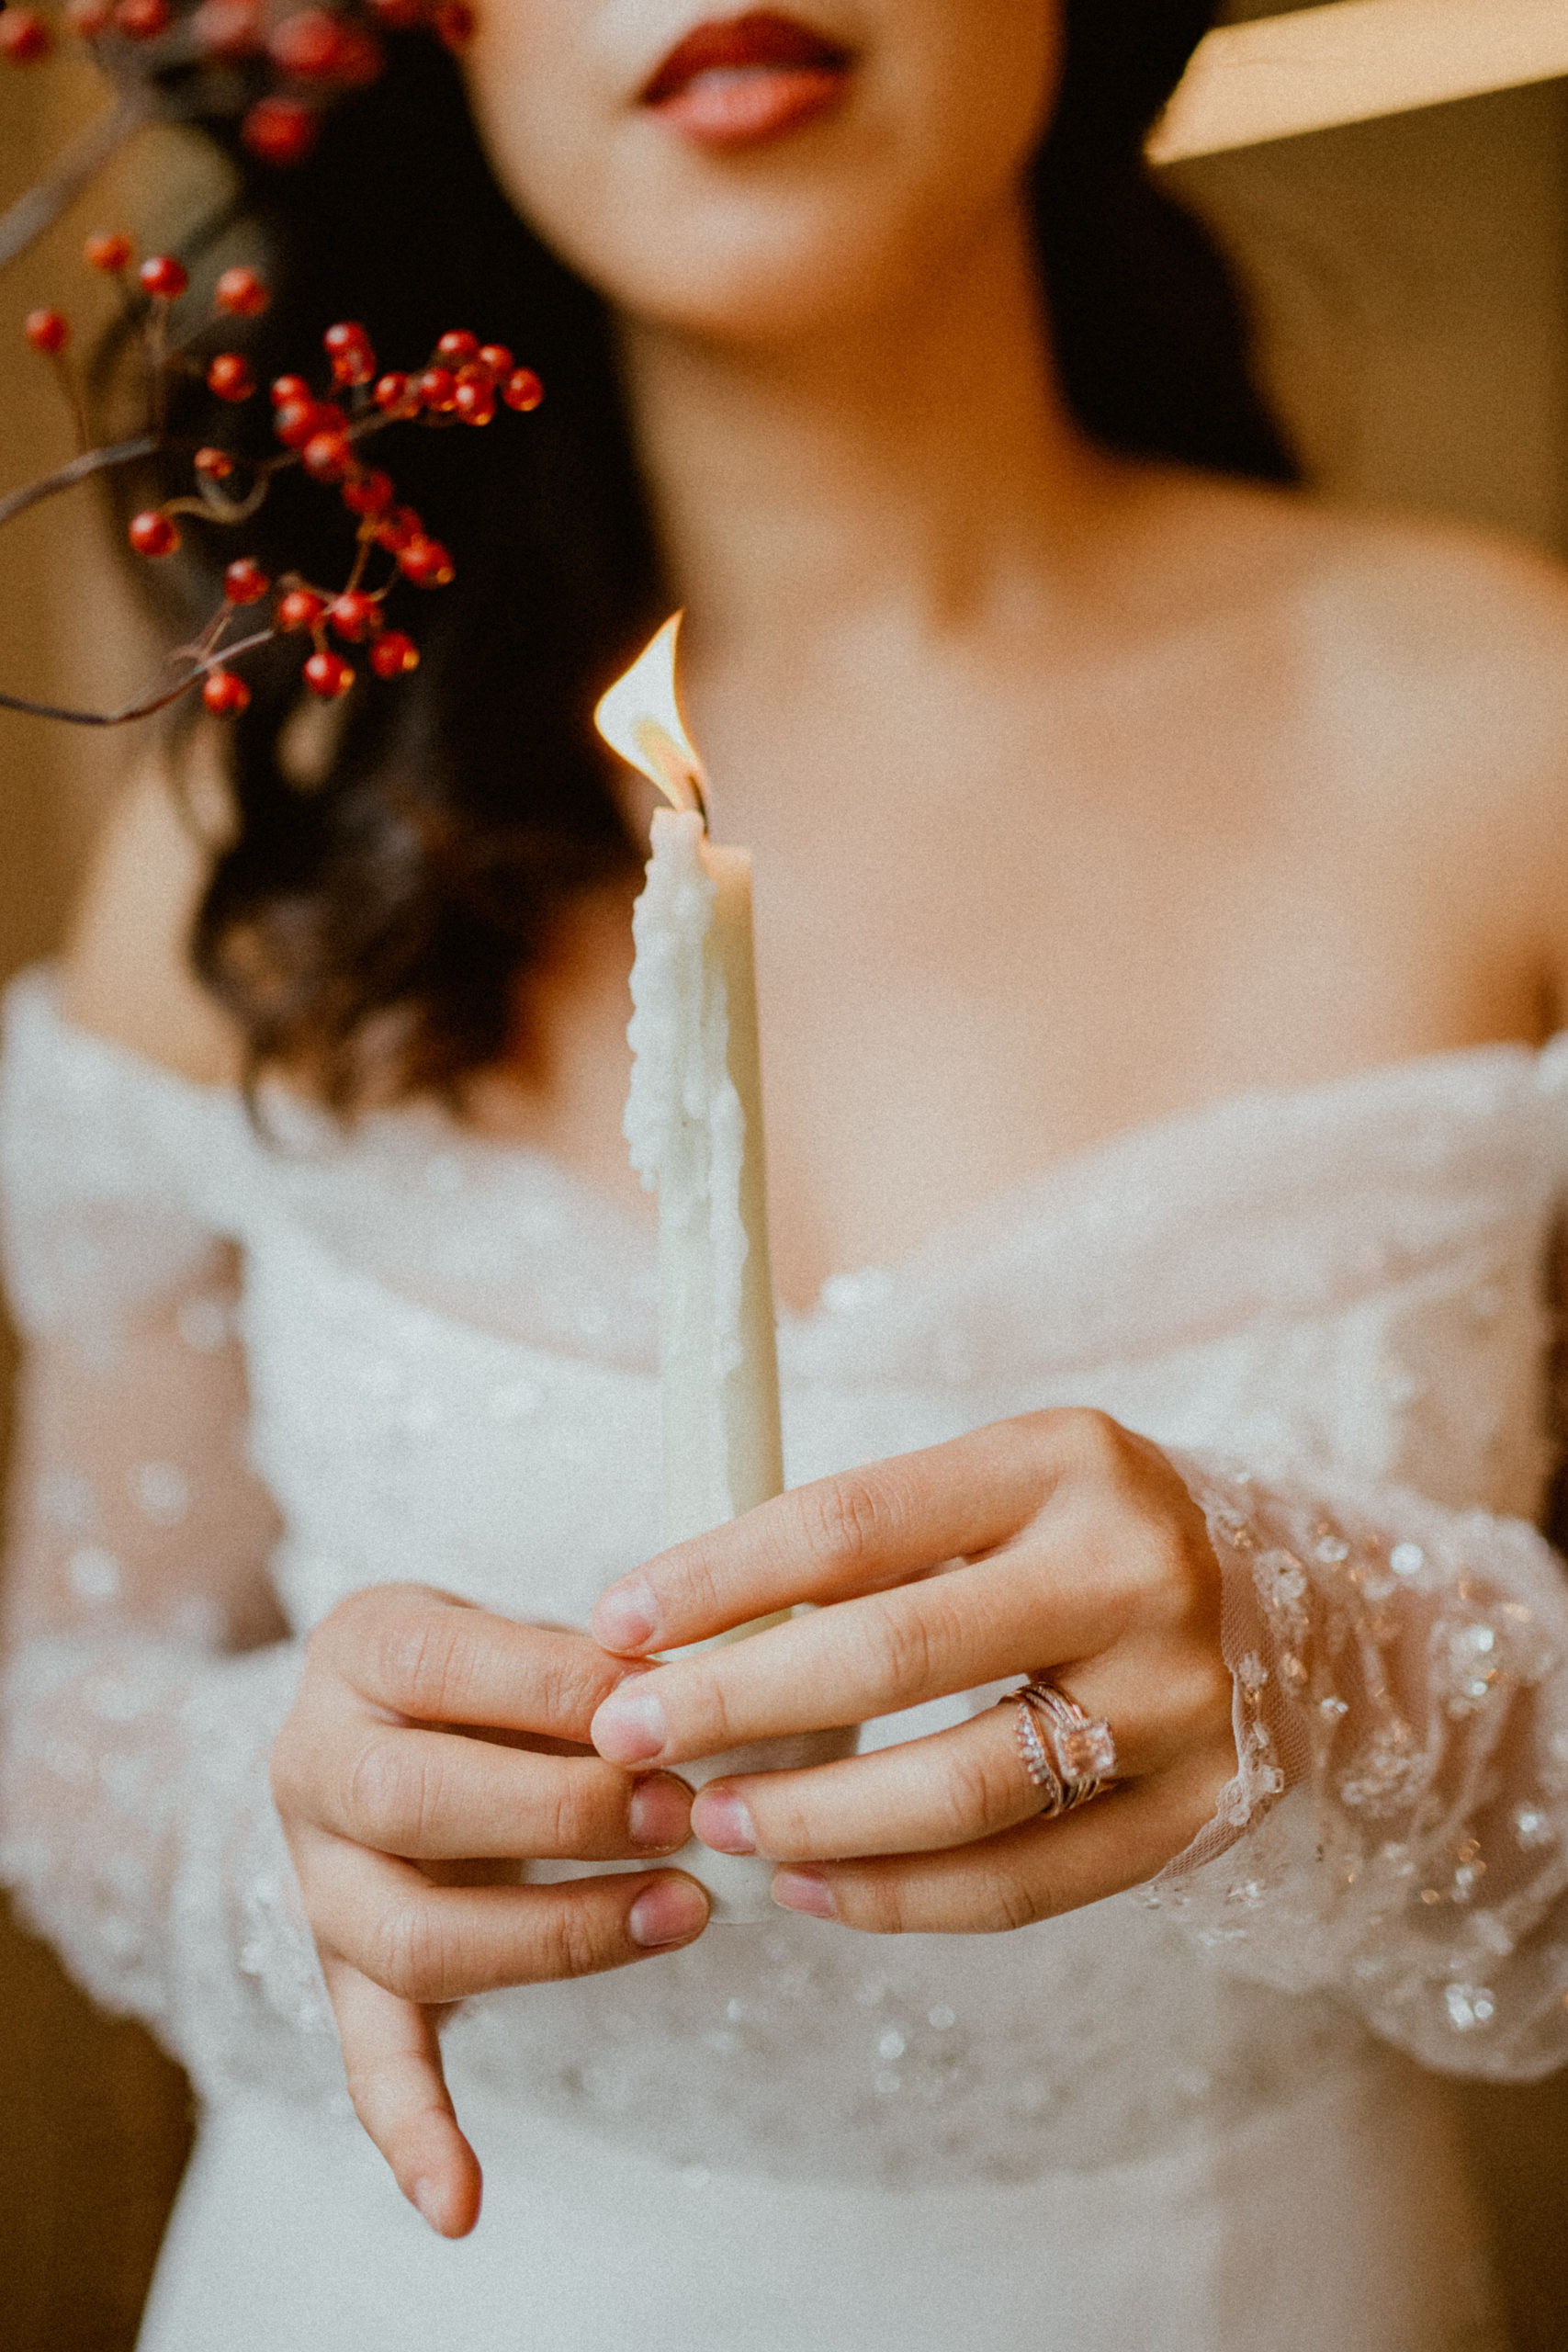 Asian bride holding a candle. Halloween style.